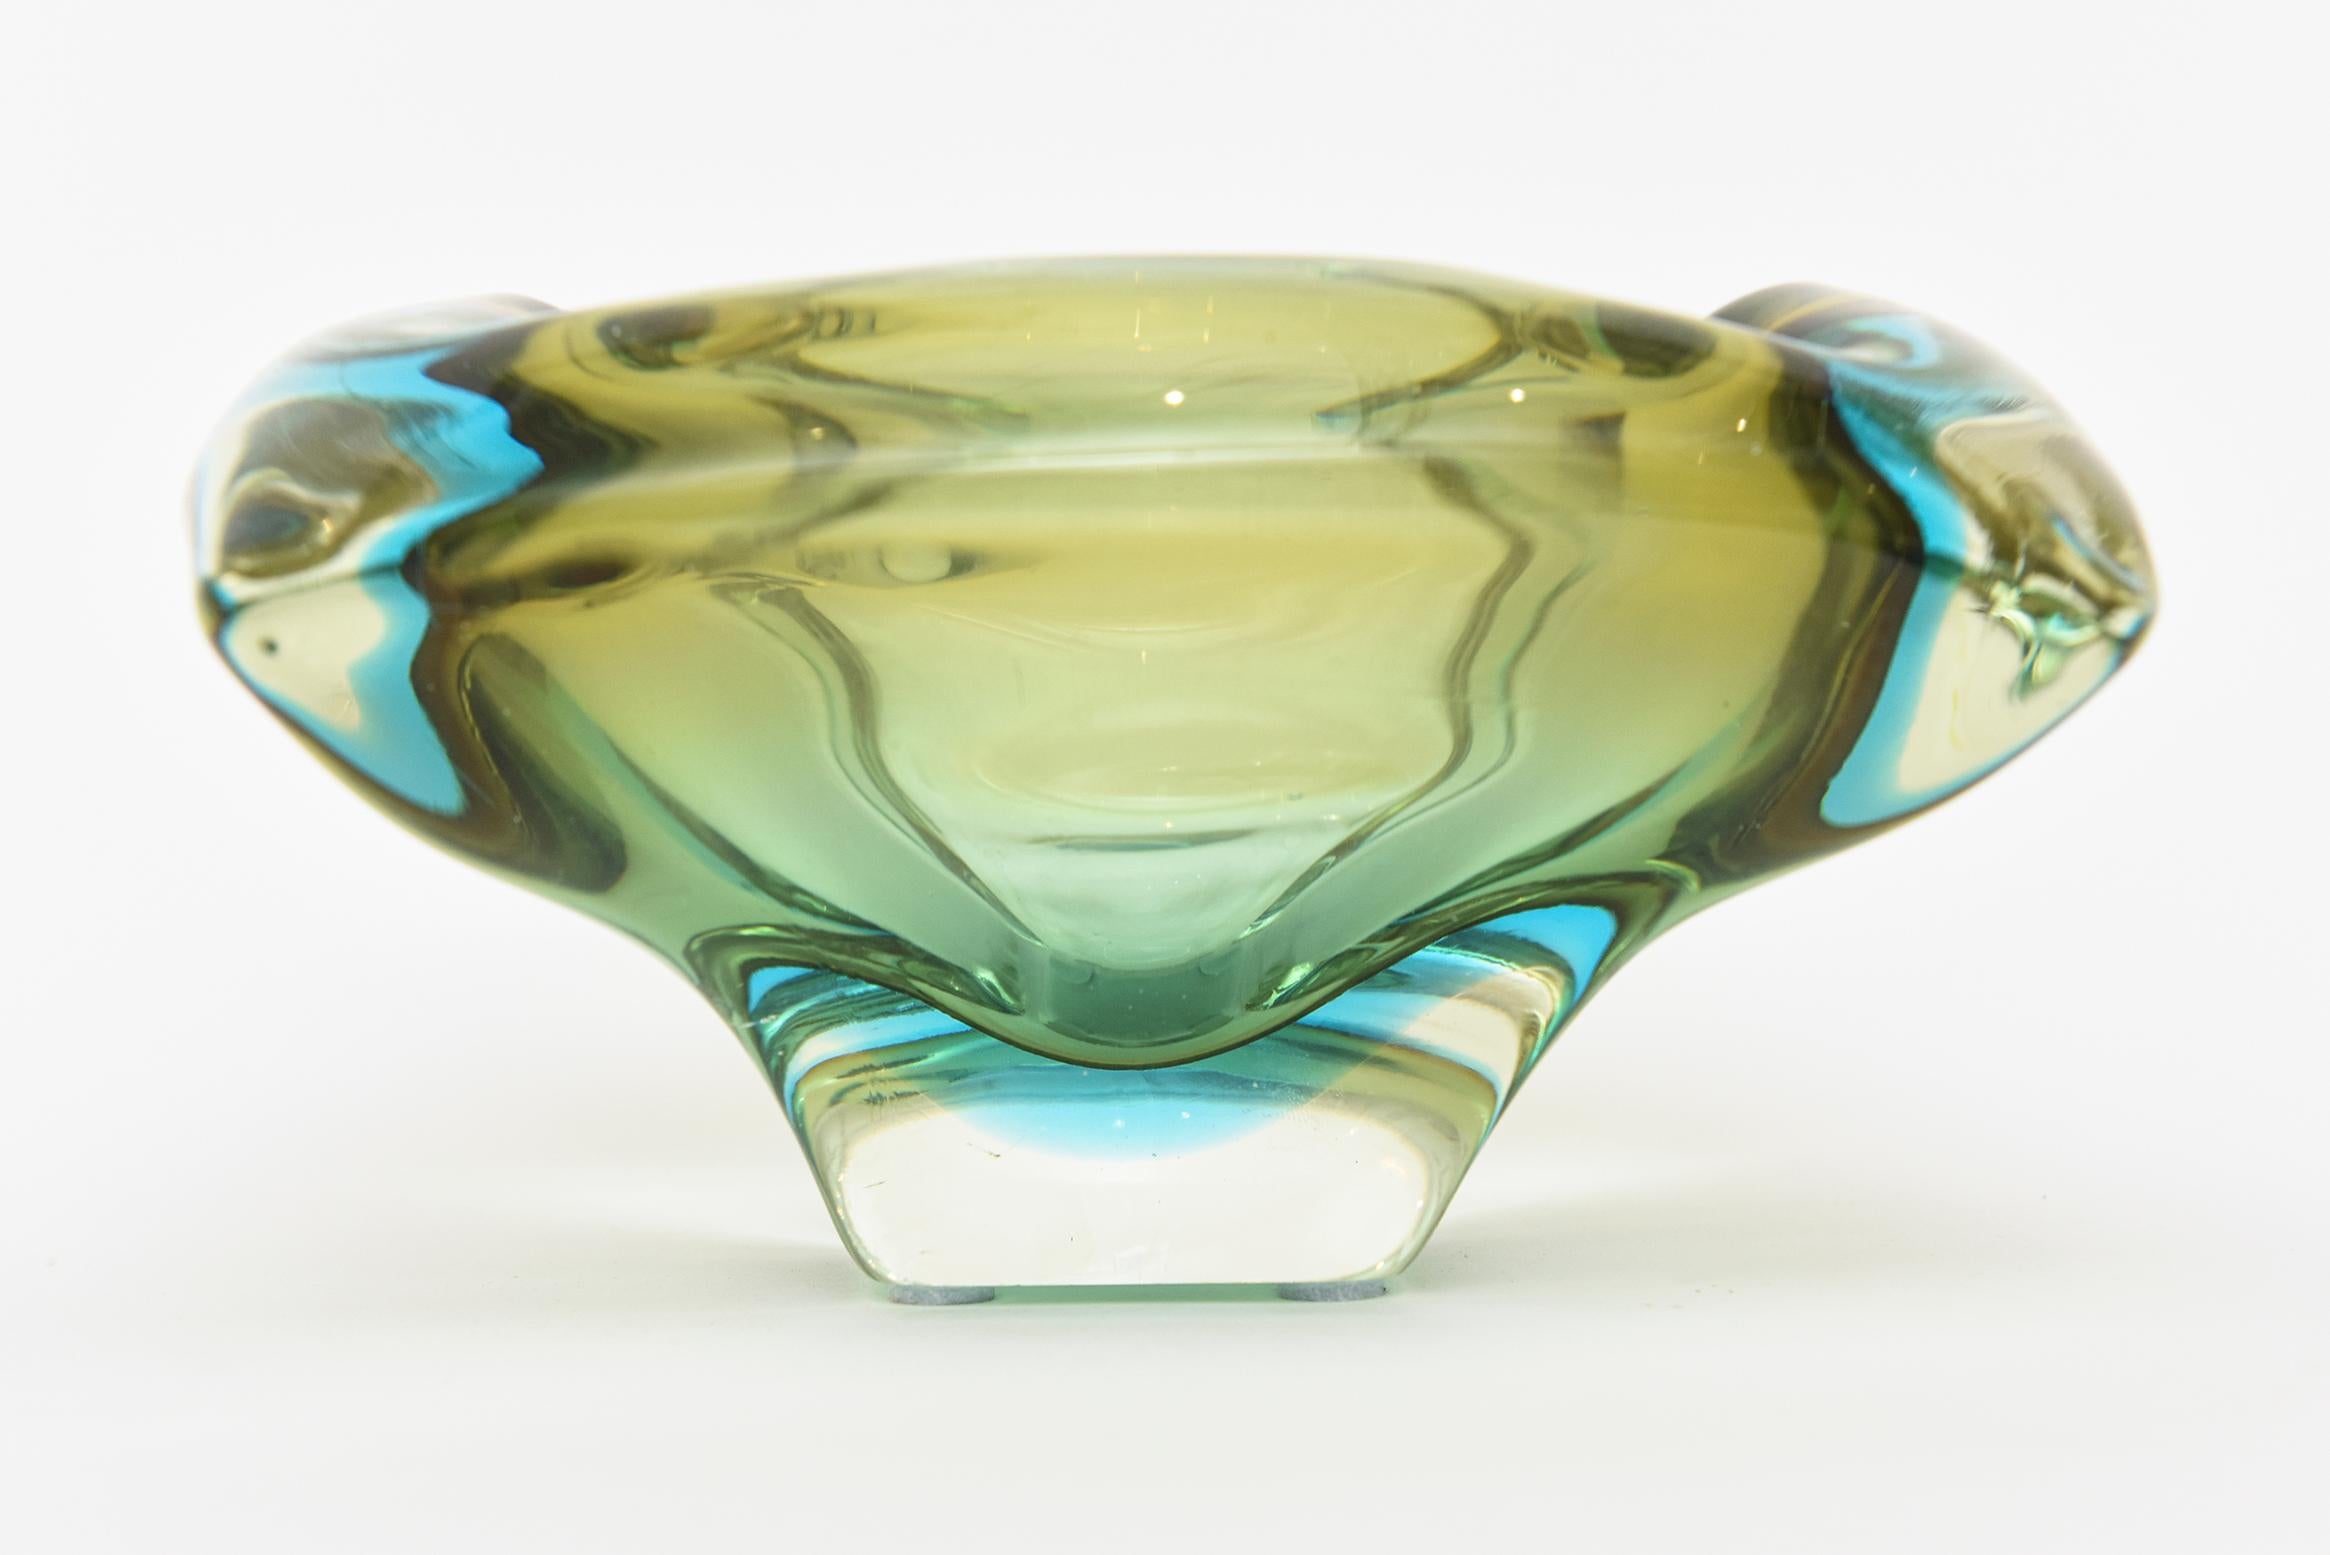 Modern Flavio Poli Vintage Murano Sommerso Turquoise and Green Glass Bowl Or Ashtray For Sale